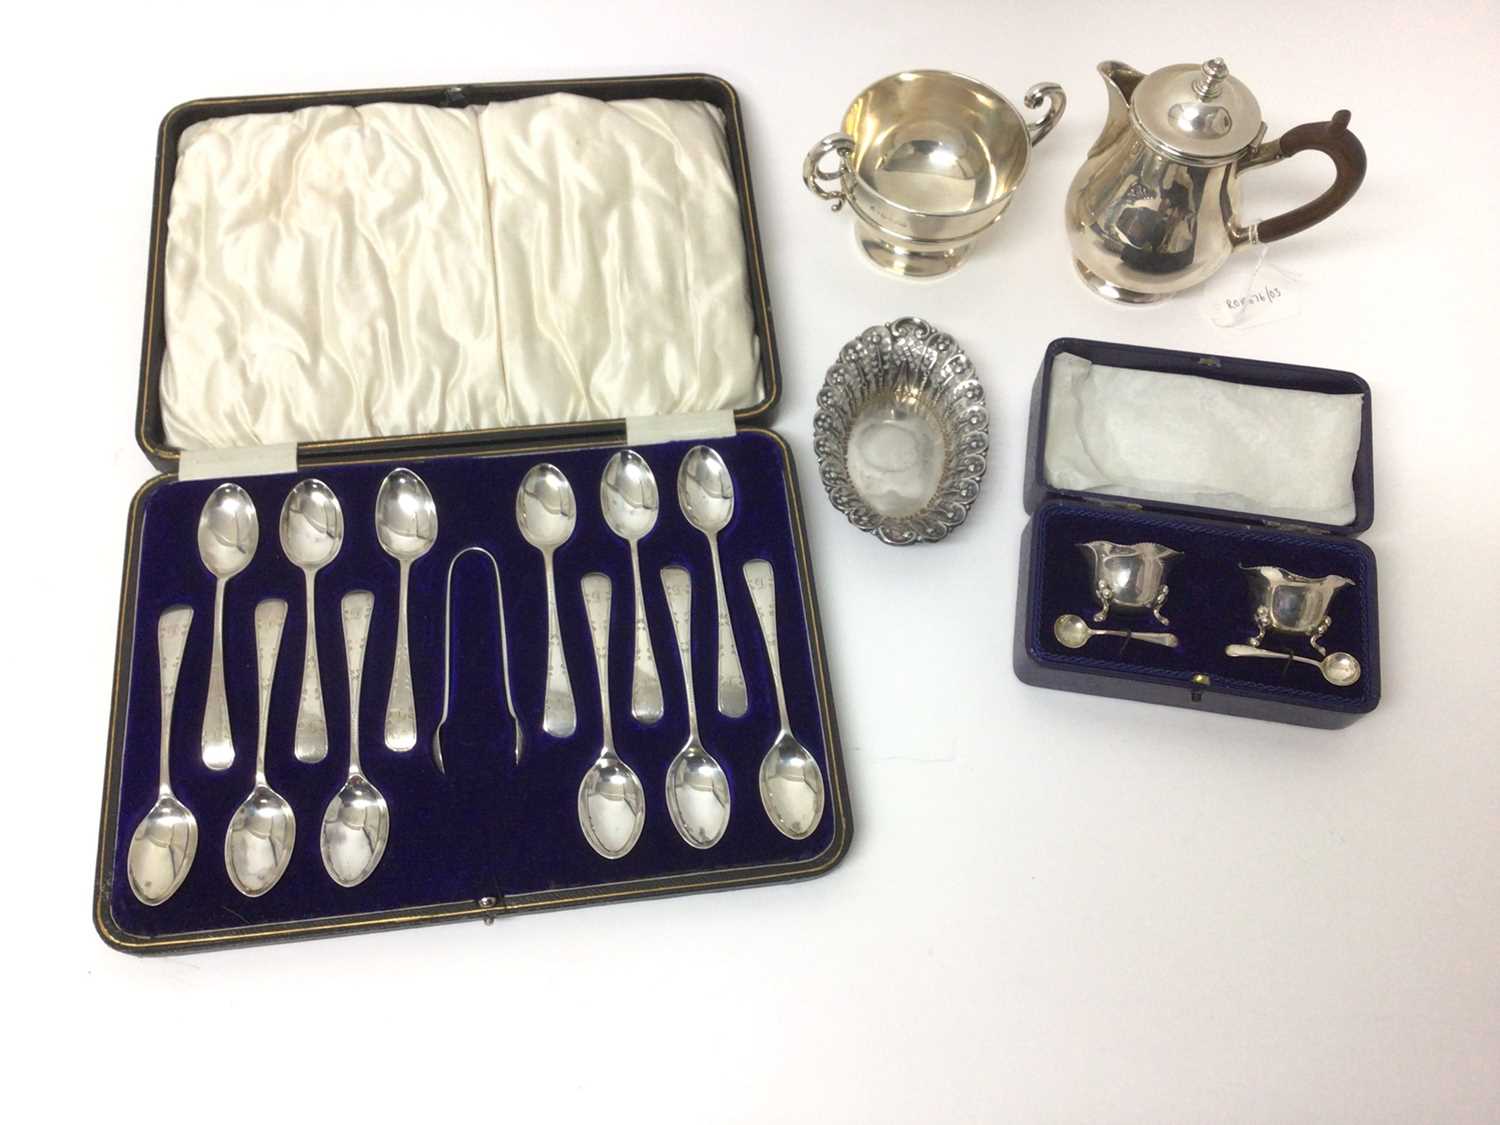 Lot 73 - Silver hot water/hot milk jug, set of twelve silver teaspoons and sugar tongs in fitted case, pair of silver salts with spoons on original fitted box, silver two handled trophy and a silver bon bon...